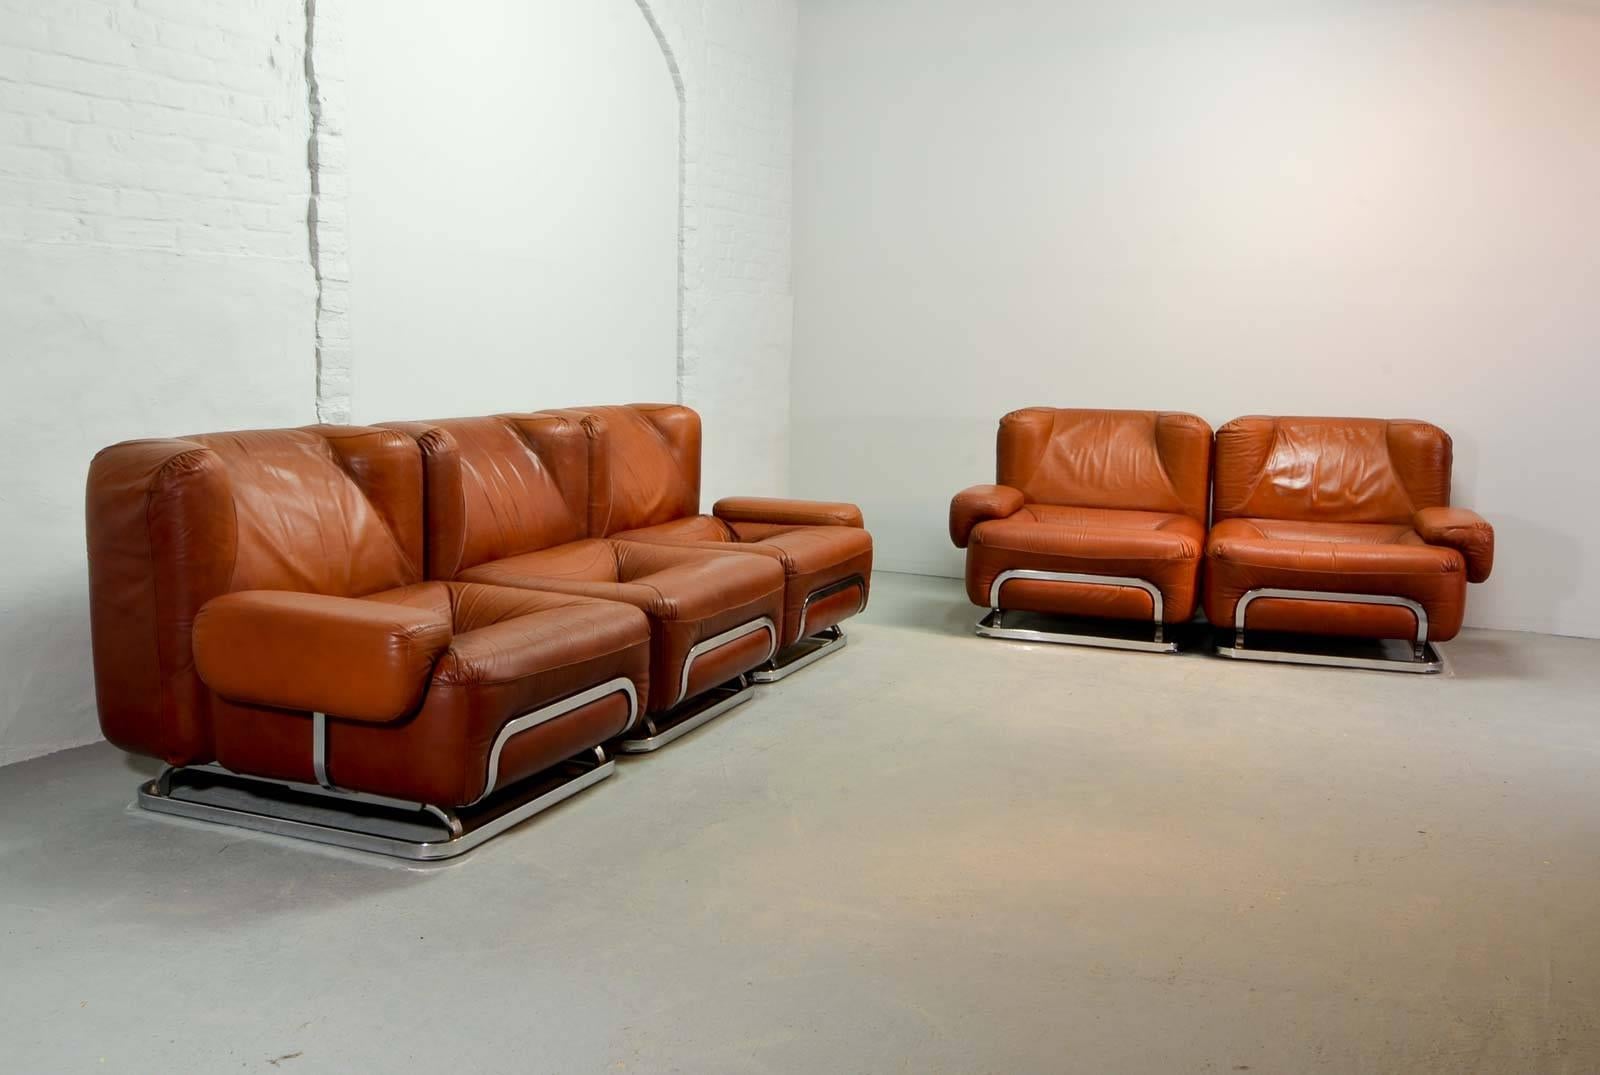 Chestnut Brown Leather Two-Seater Sofa in Style of Tobia Scarpa, 1970s For Sale 1